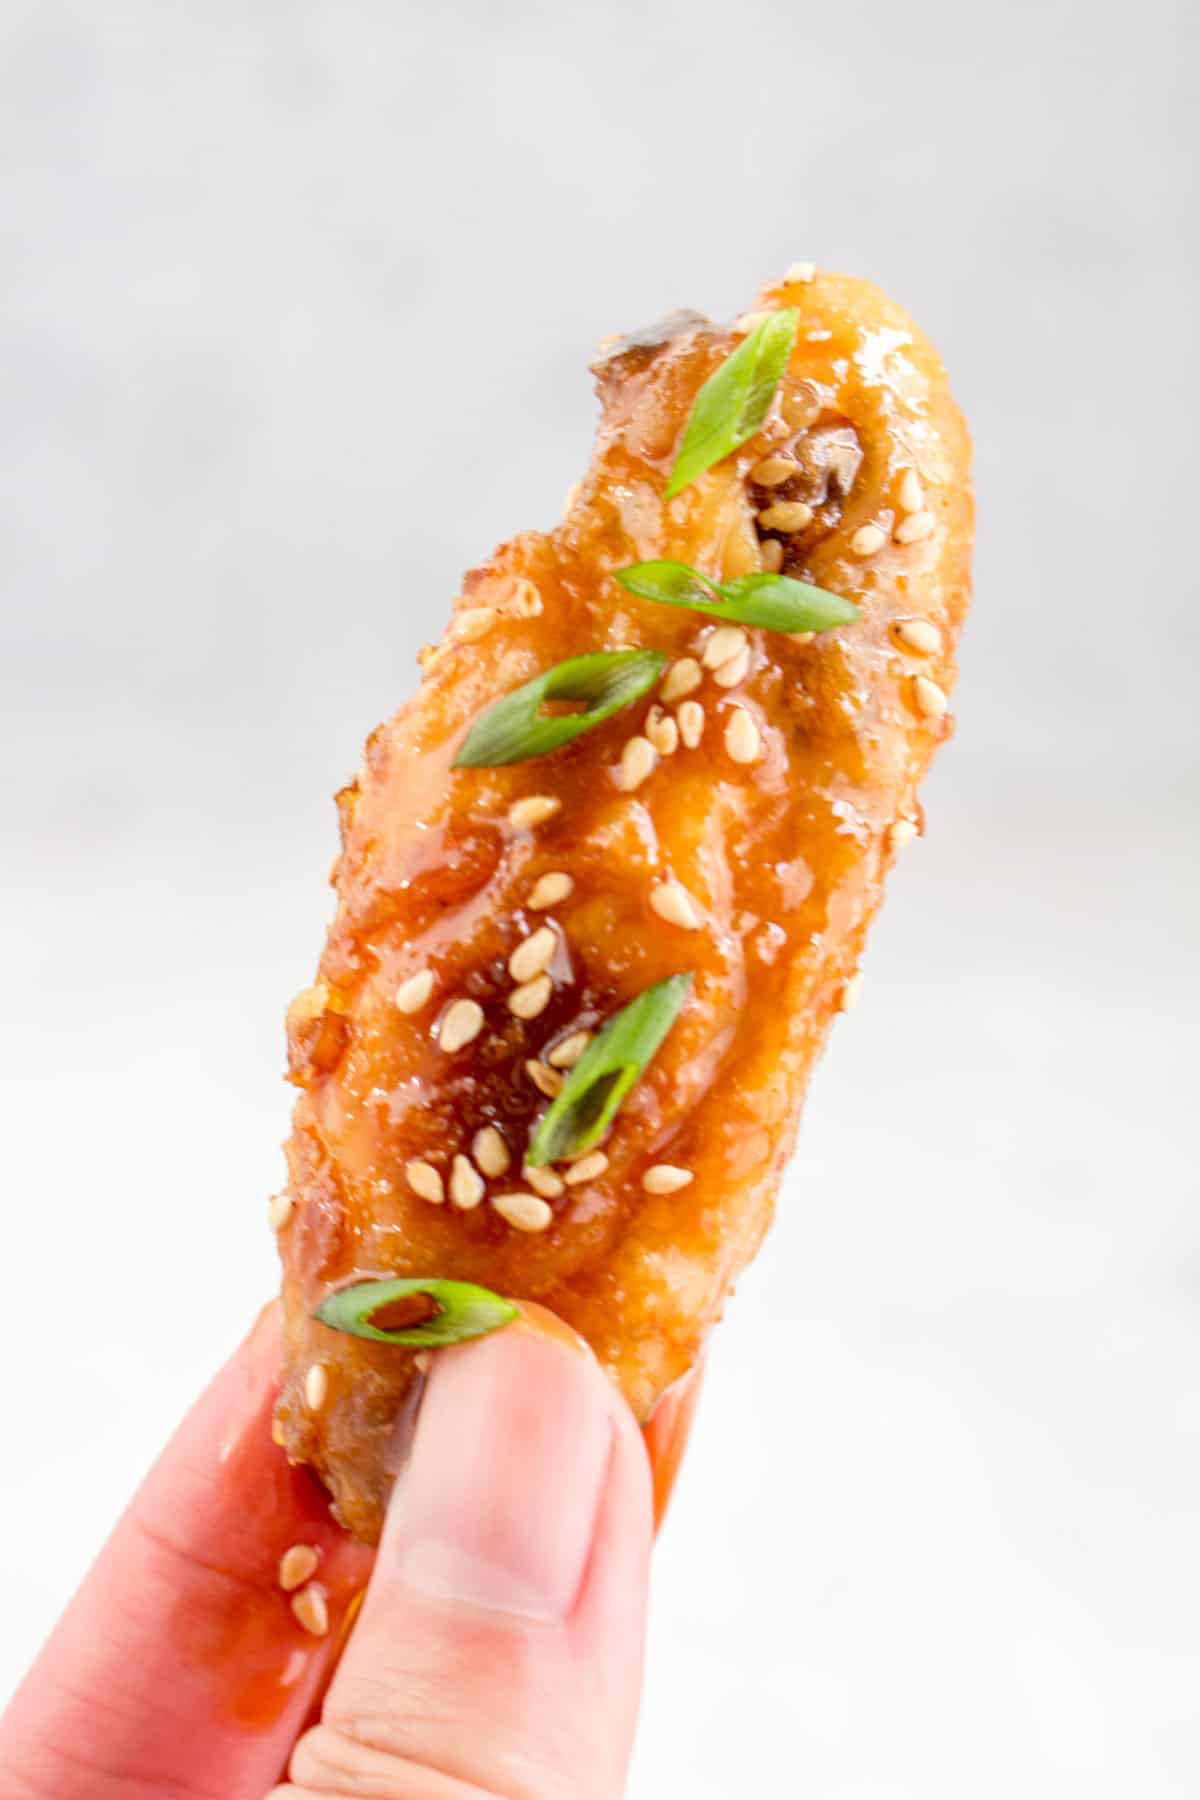 A hand holding a single chicken wing with teriyaki sauce, green onions, and sesame seeds.